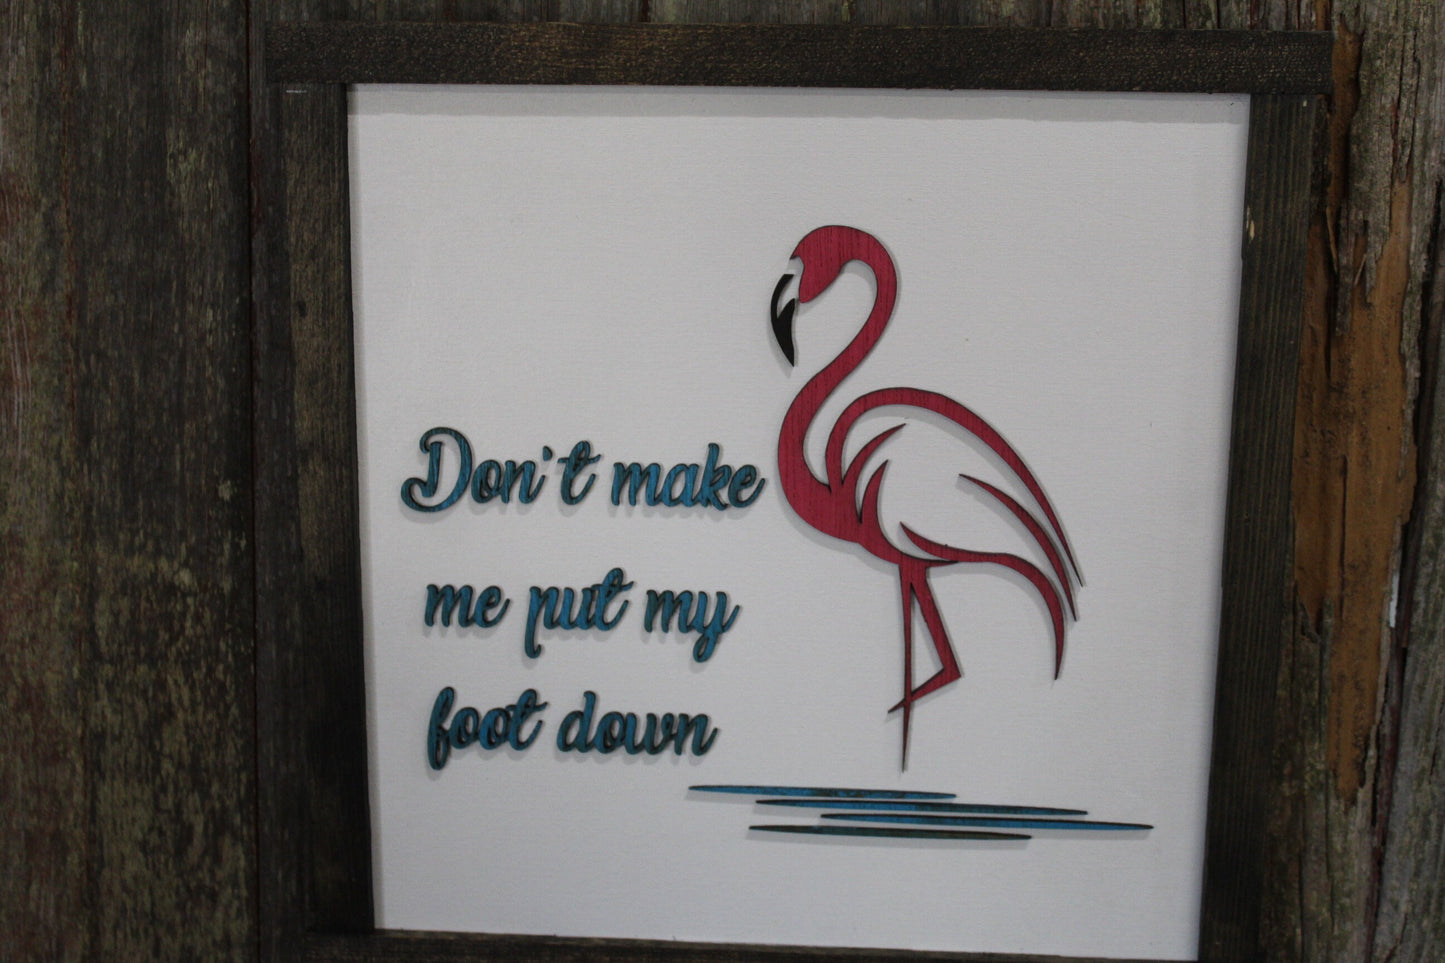 Flamingo Wood Sign Raised Image Don't Make Me Put My Foot Down Silly Stern Wall Hanging Bird Beach Ocean Decor Pink 3D Farmhouse Rustic